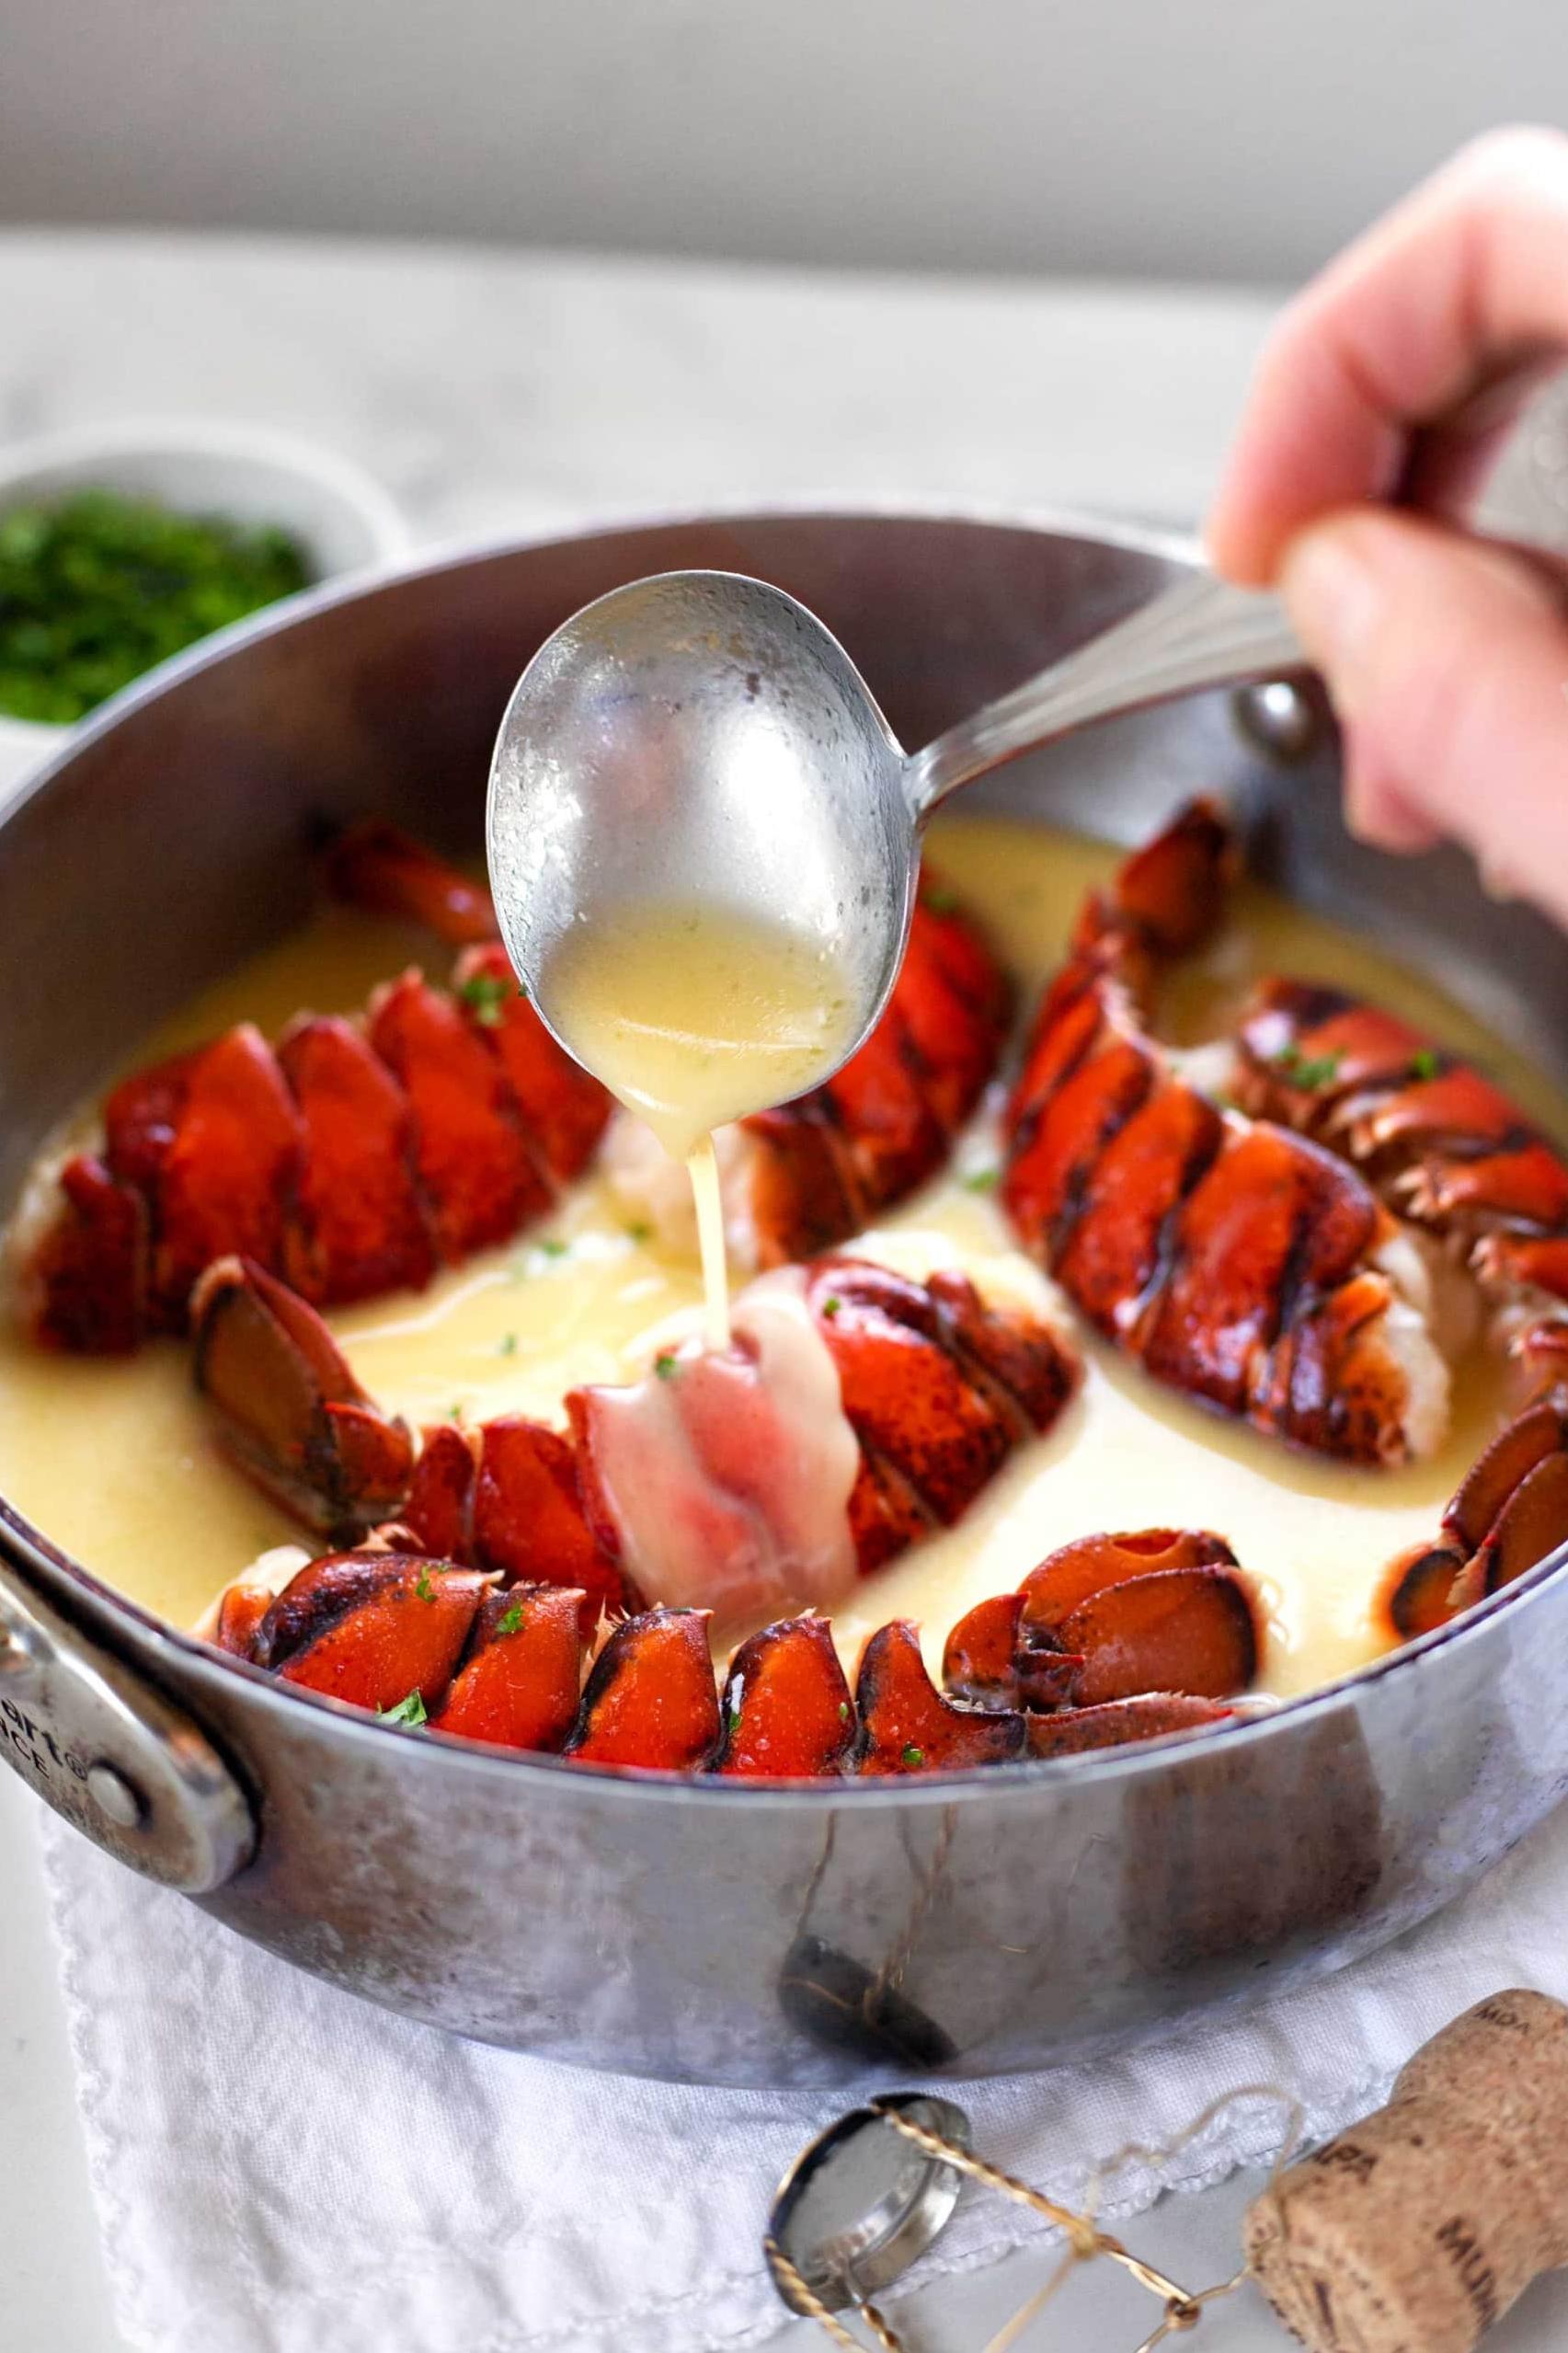  Get ready to impress with this luxurious and easy-to-make Lobster with Champagne Dipping Sauce.